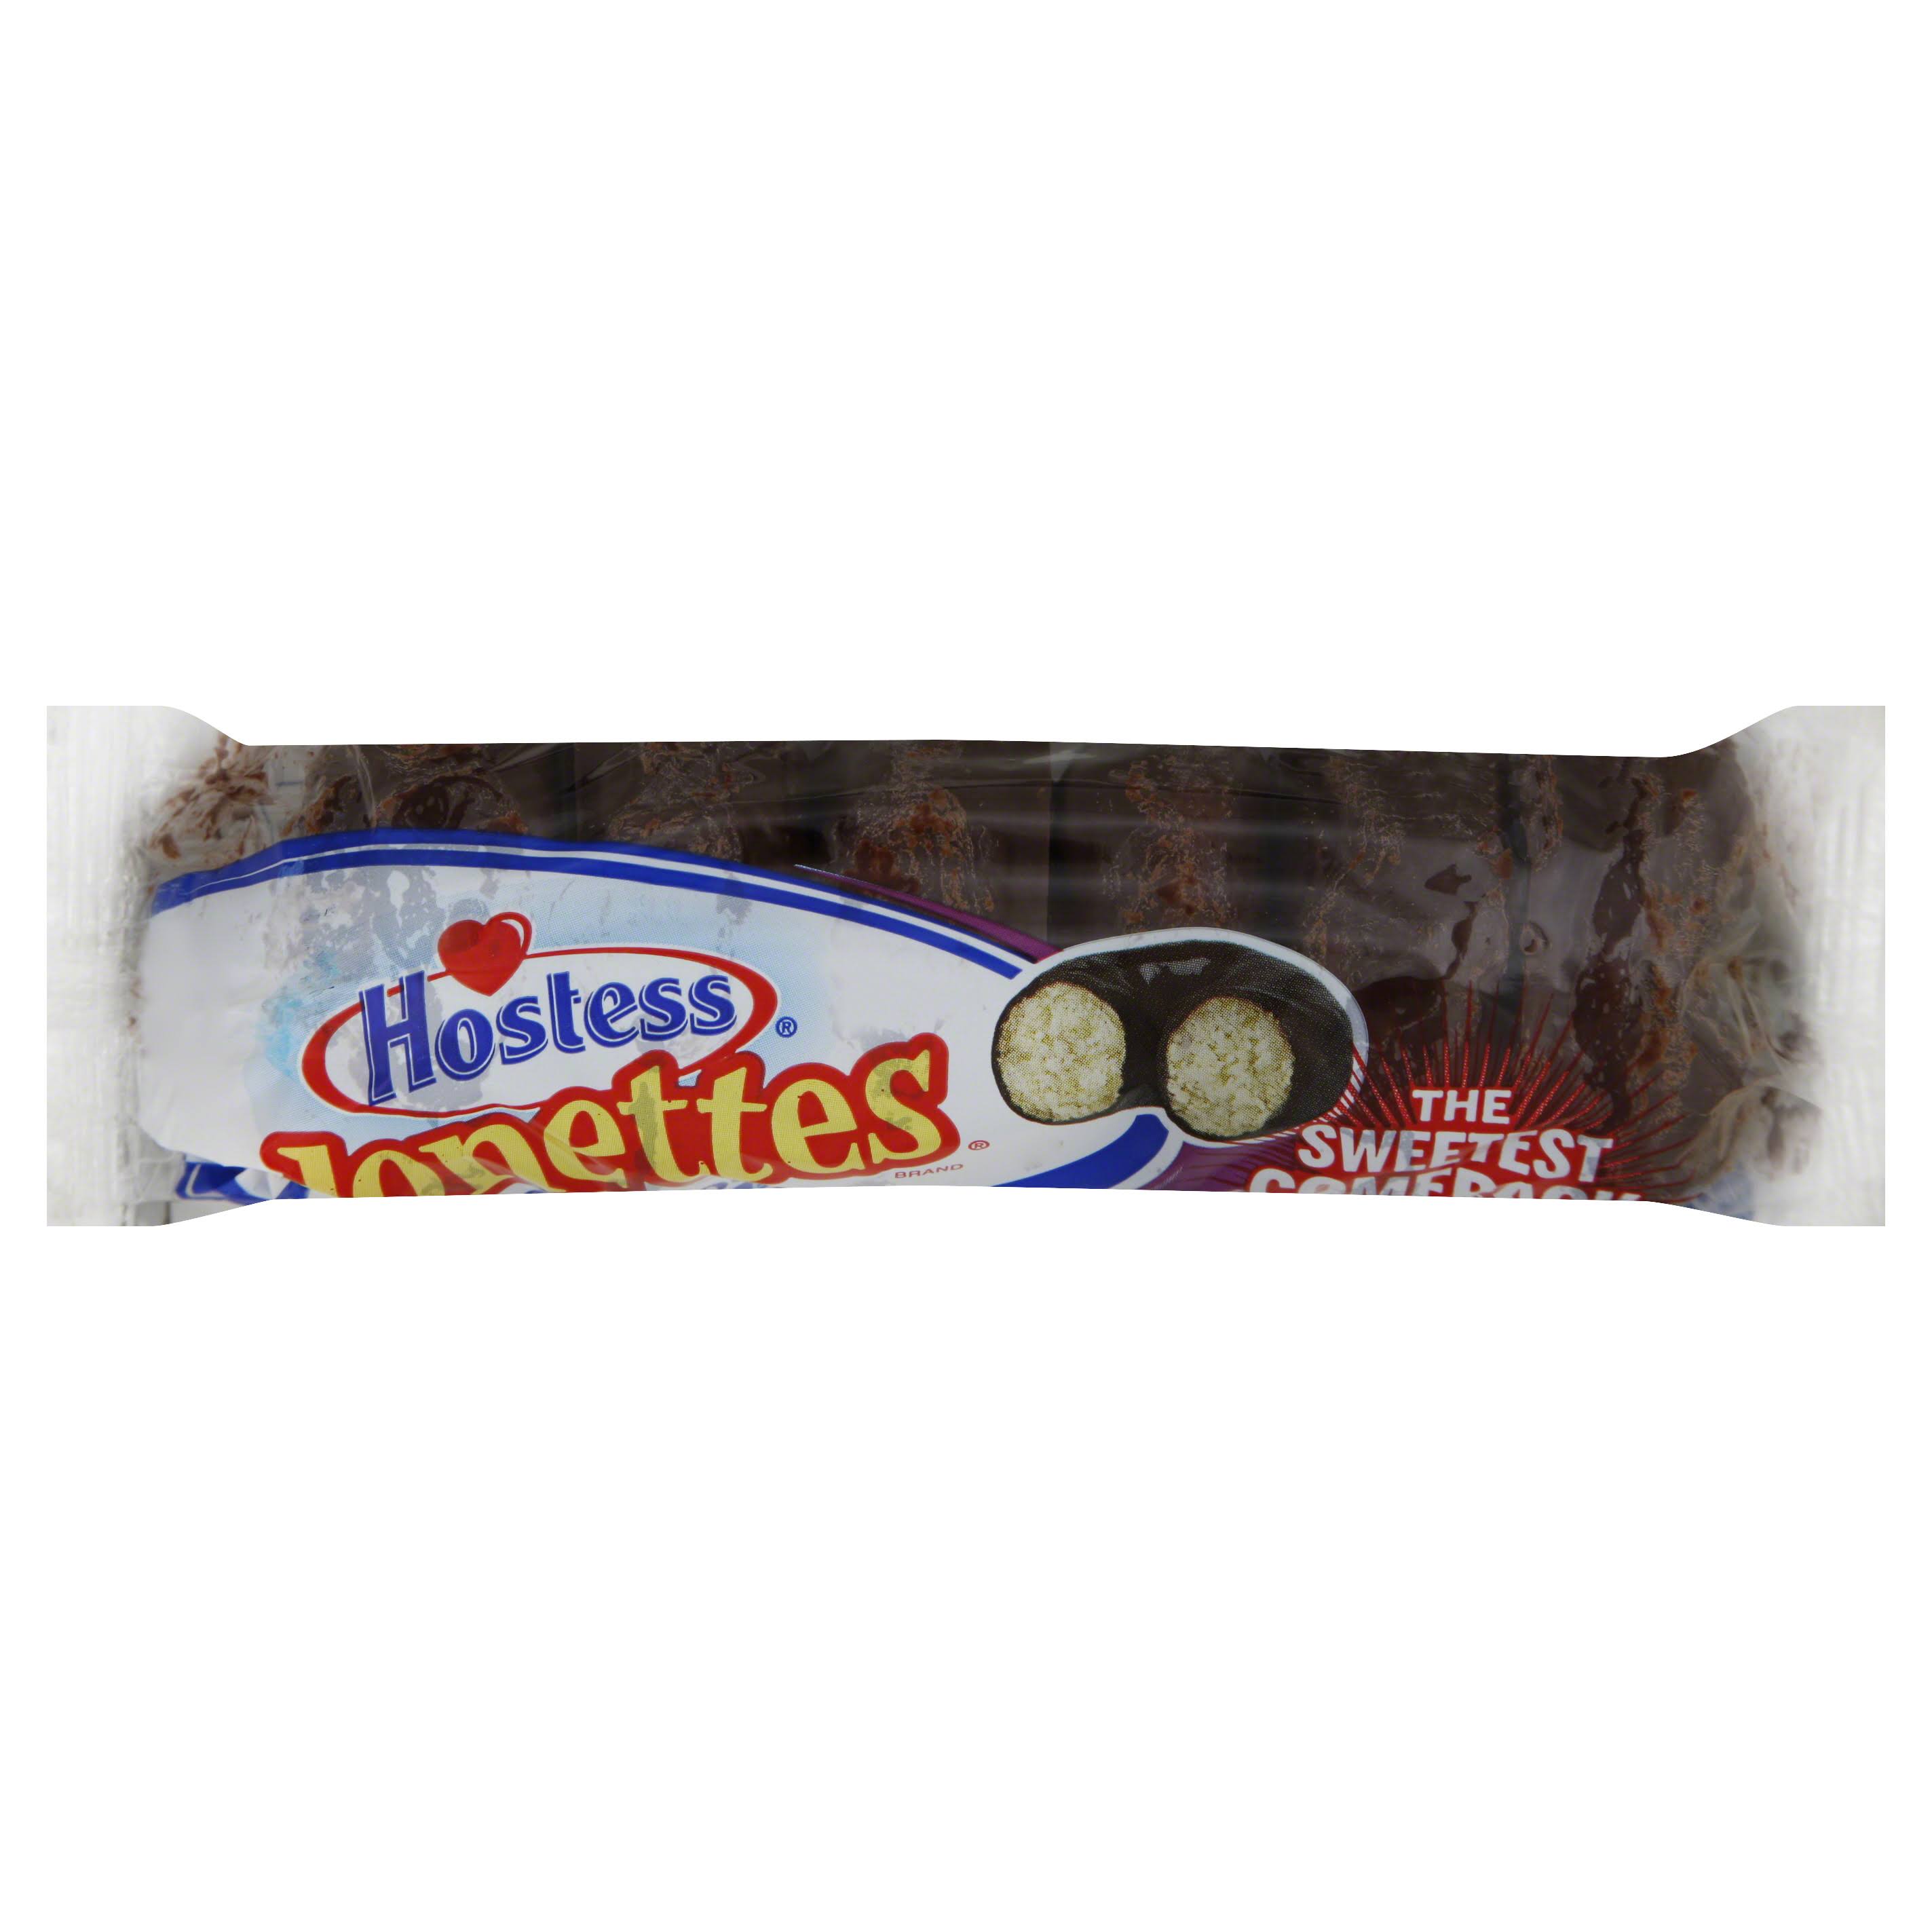 Hostess Donettes Frosted Mini Donuts - 3oz, x6